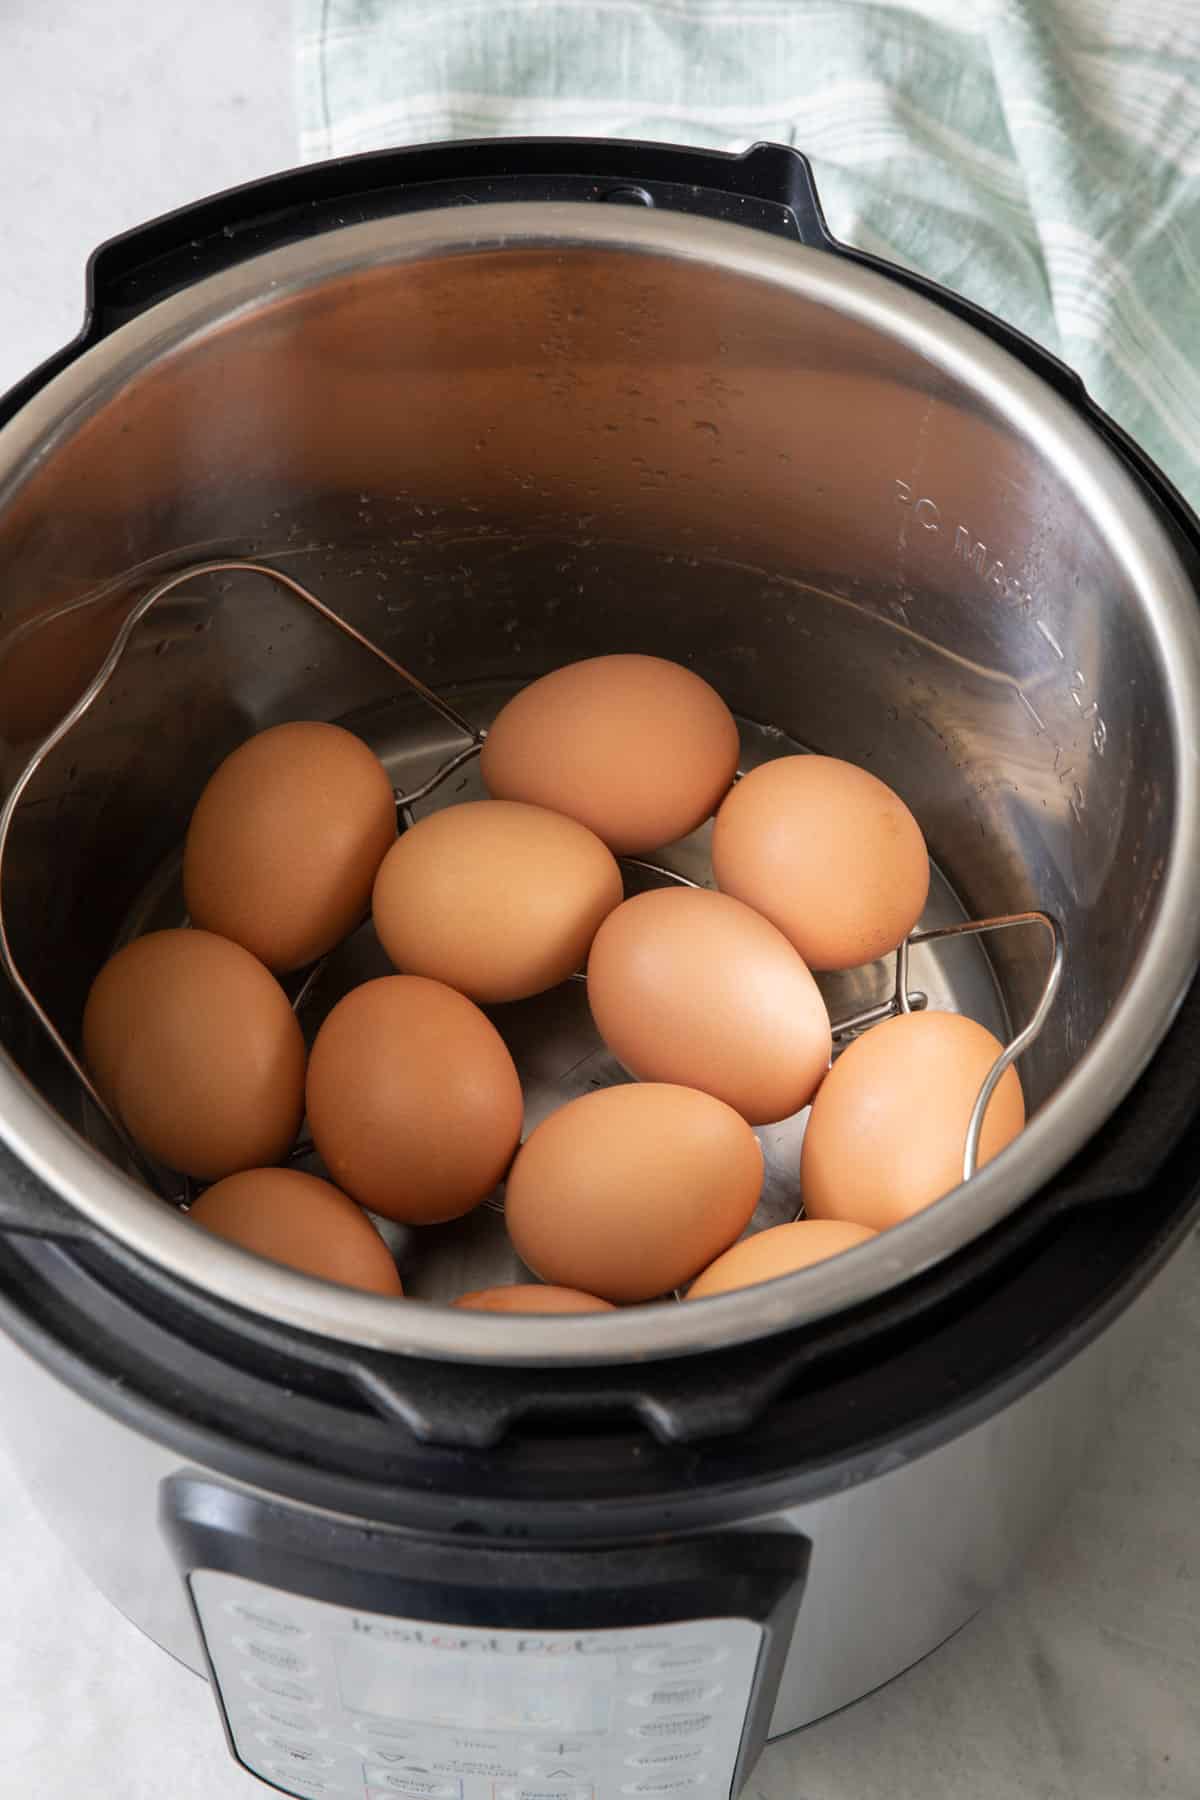 Instant pot with 12 eggs after cooking.